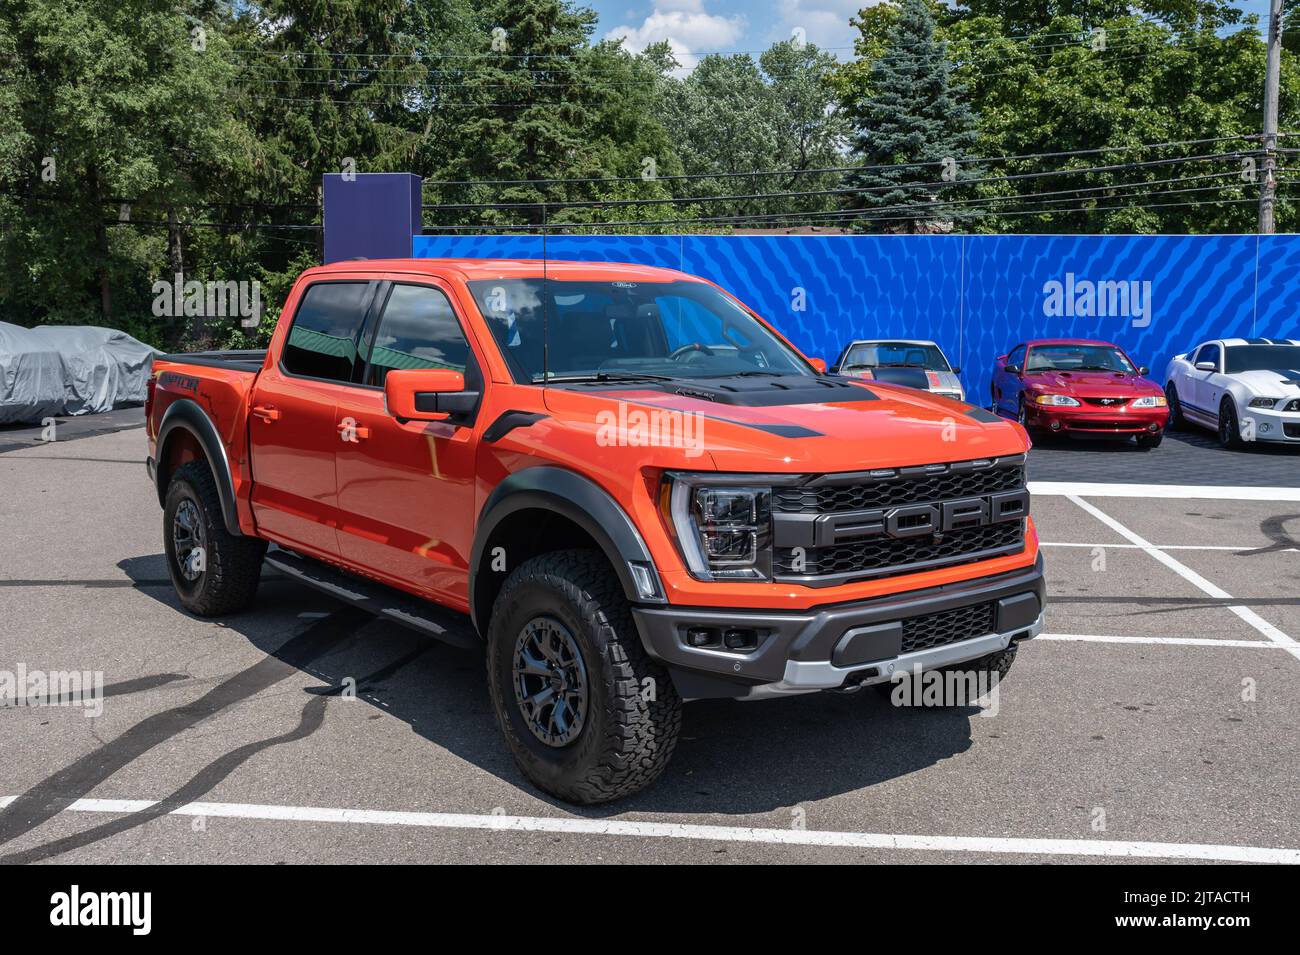 ROYAL OAK, MI/USA - AUGUST 19, 2022: A 2022 Ford F-150 Raptor truck at the Ford exhibit on the Woodward Dream Cruise route. Stock Photo